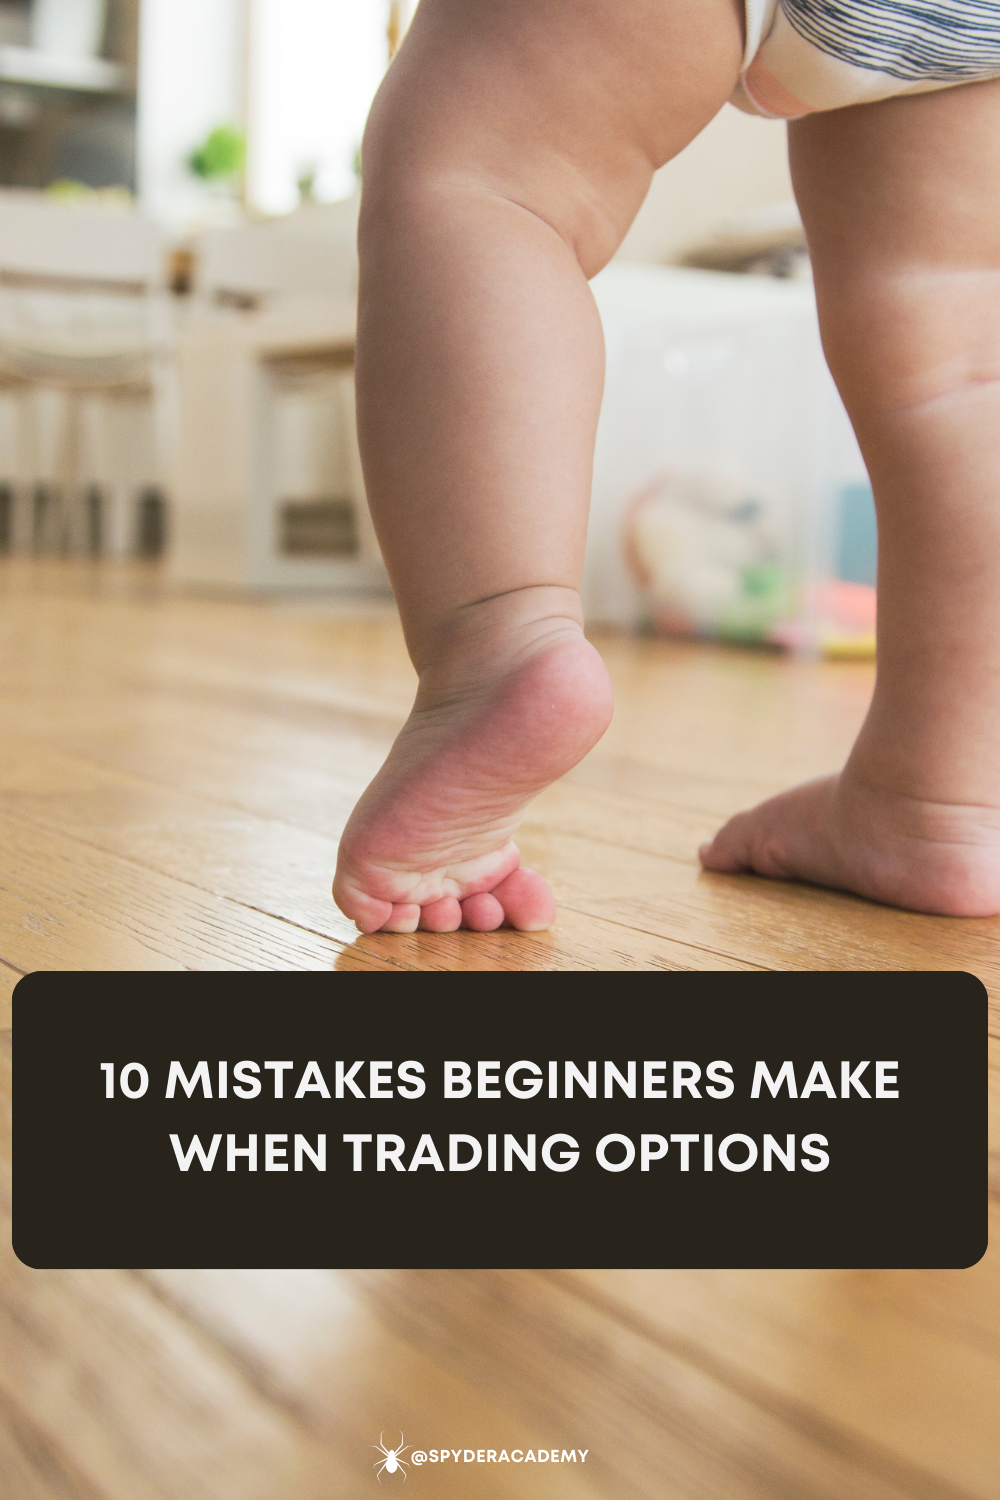 Common Mistakes when Trading Options are Lack of Education, Ignoring Risk Management, Not having a Trading Plan, Overlooking Implied Volatility, Chasing High Returns, Failing to Diversify, Holding Through Expiration, Neglection Fees, Lack of Patience, Not Seeking Help.